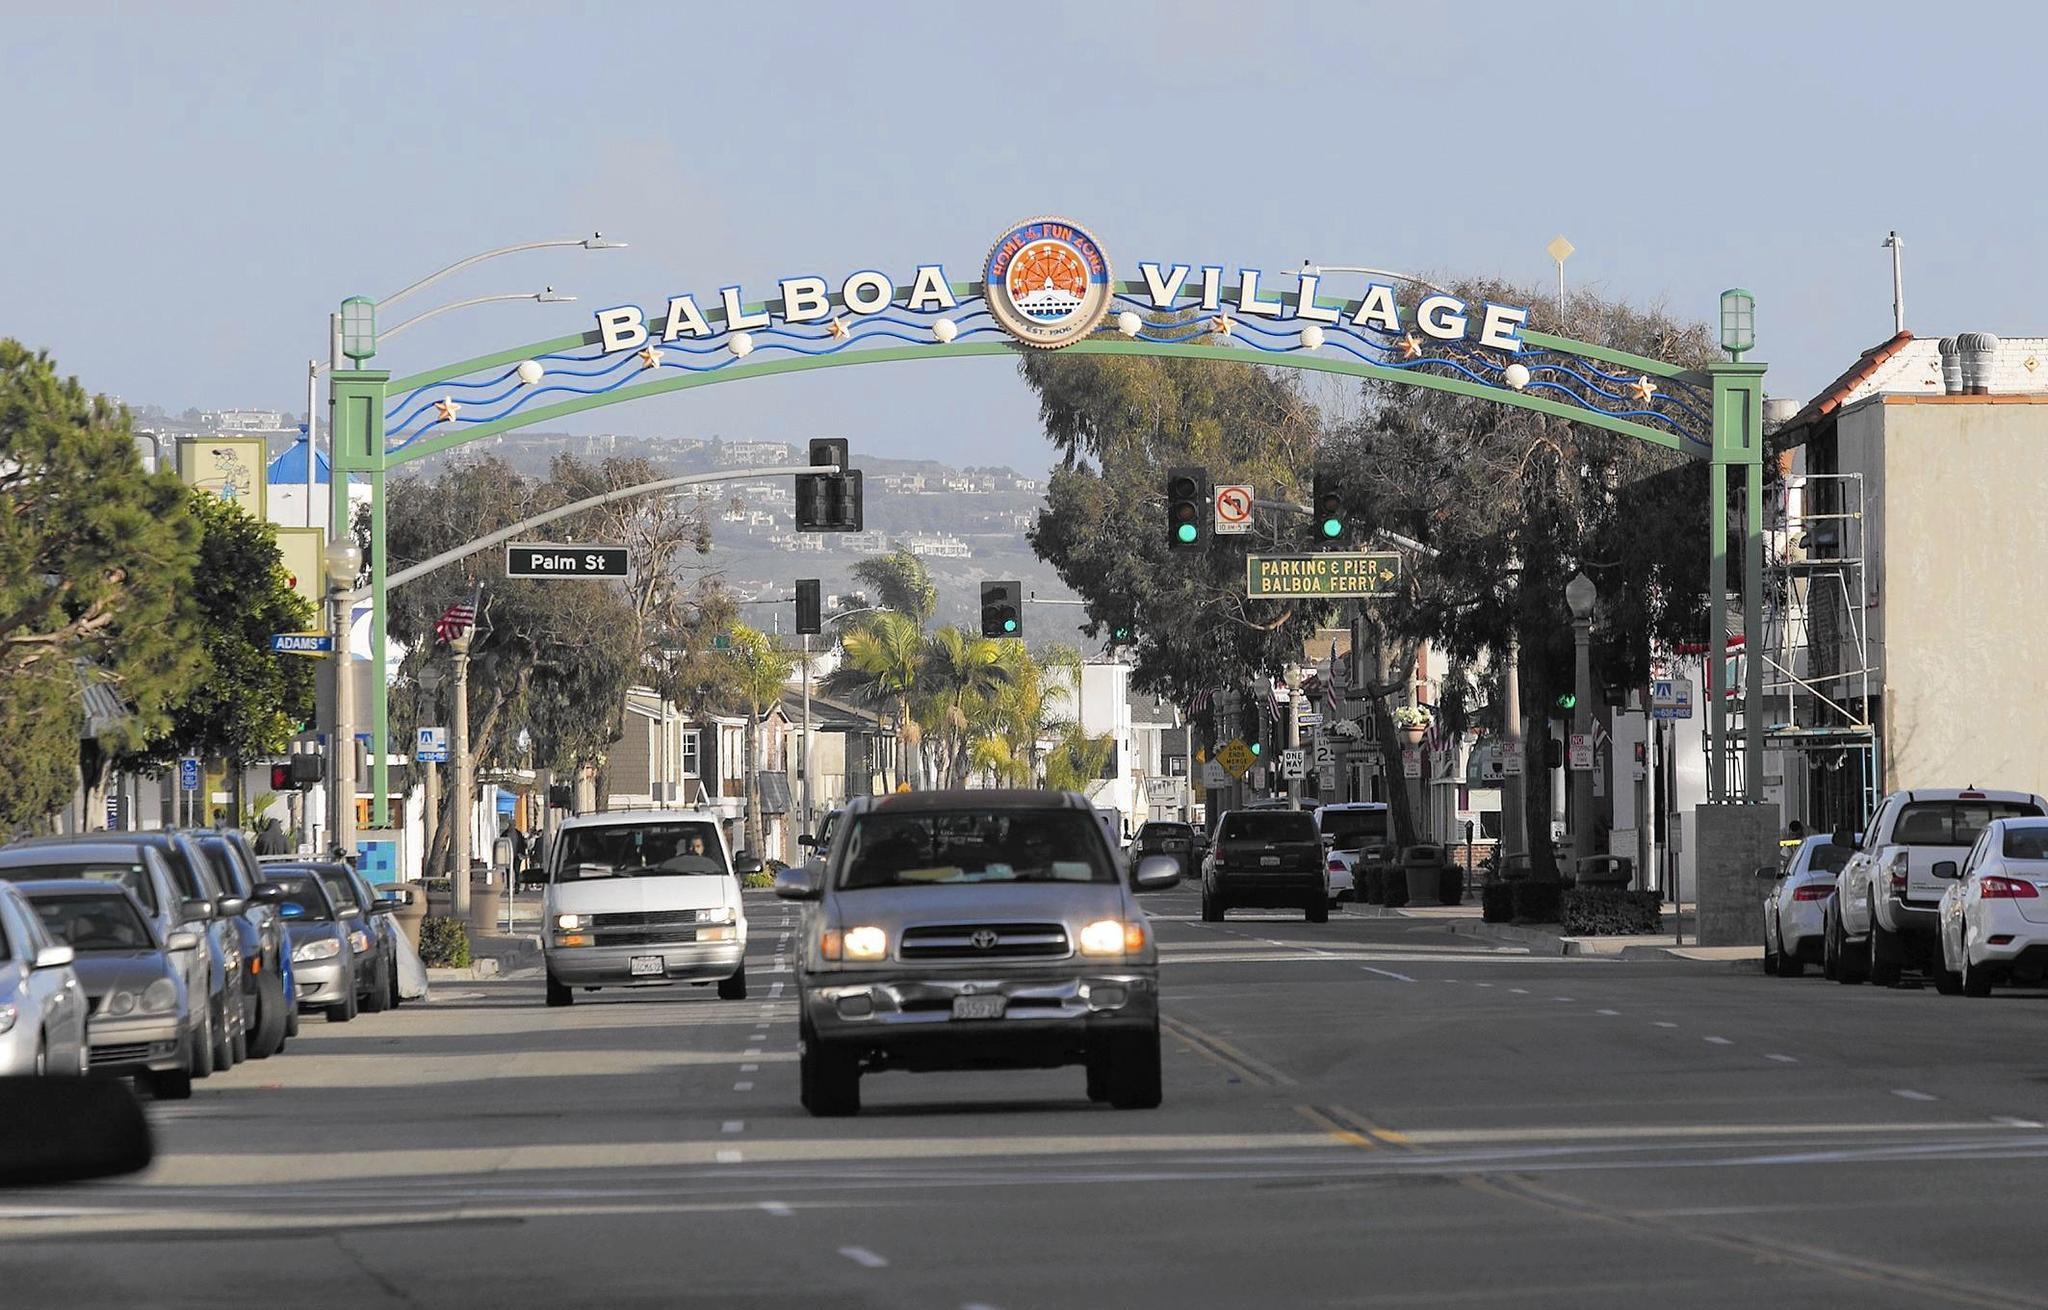 Balboa Village gets a new arch to promote 'Home of the Fun Zone' - Los Angeles Times